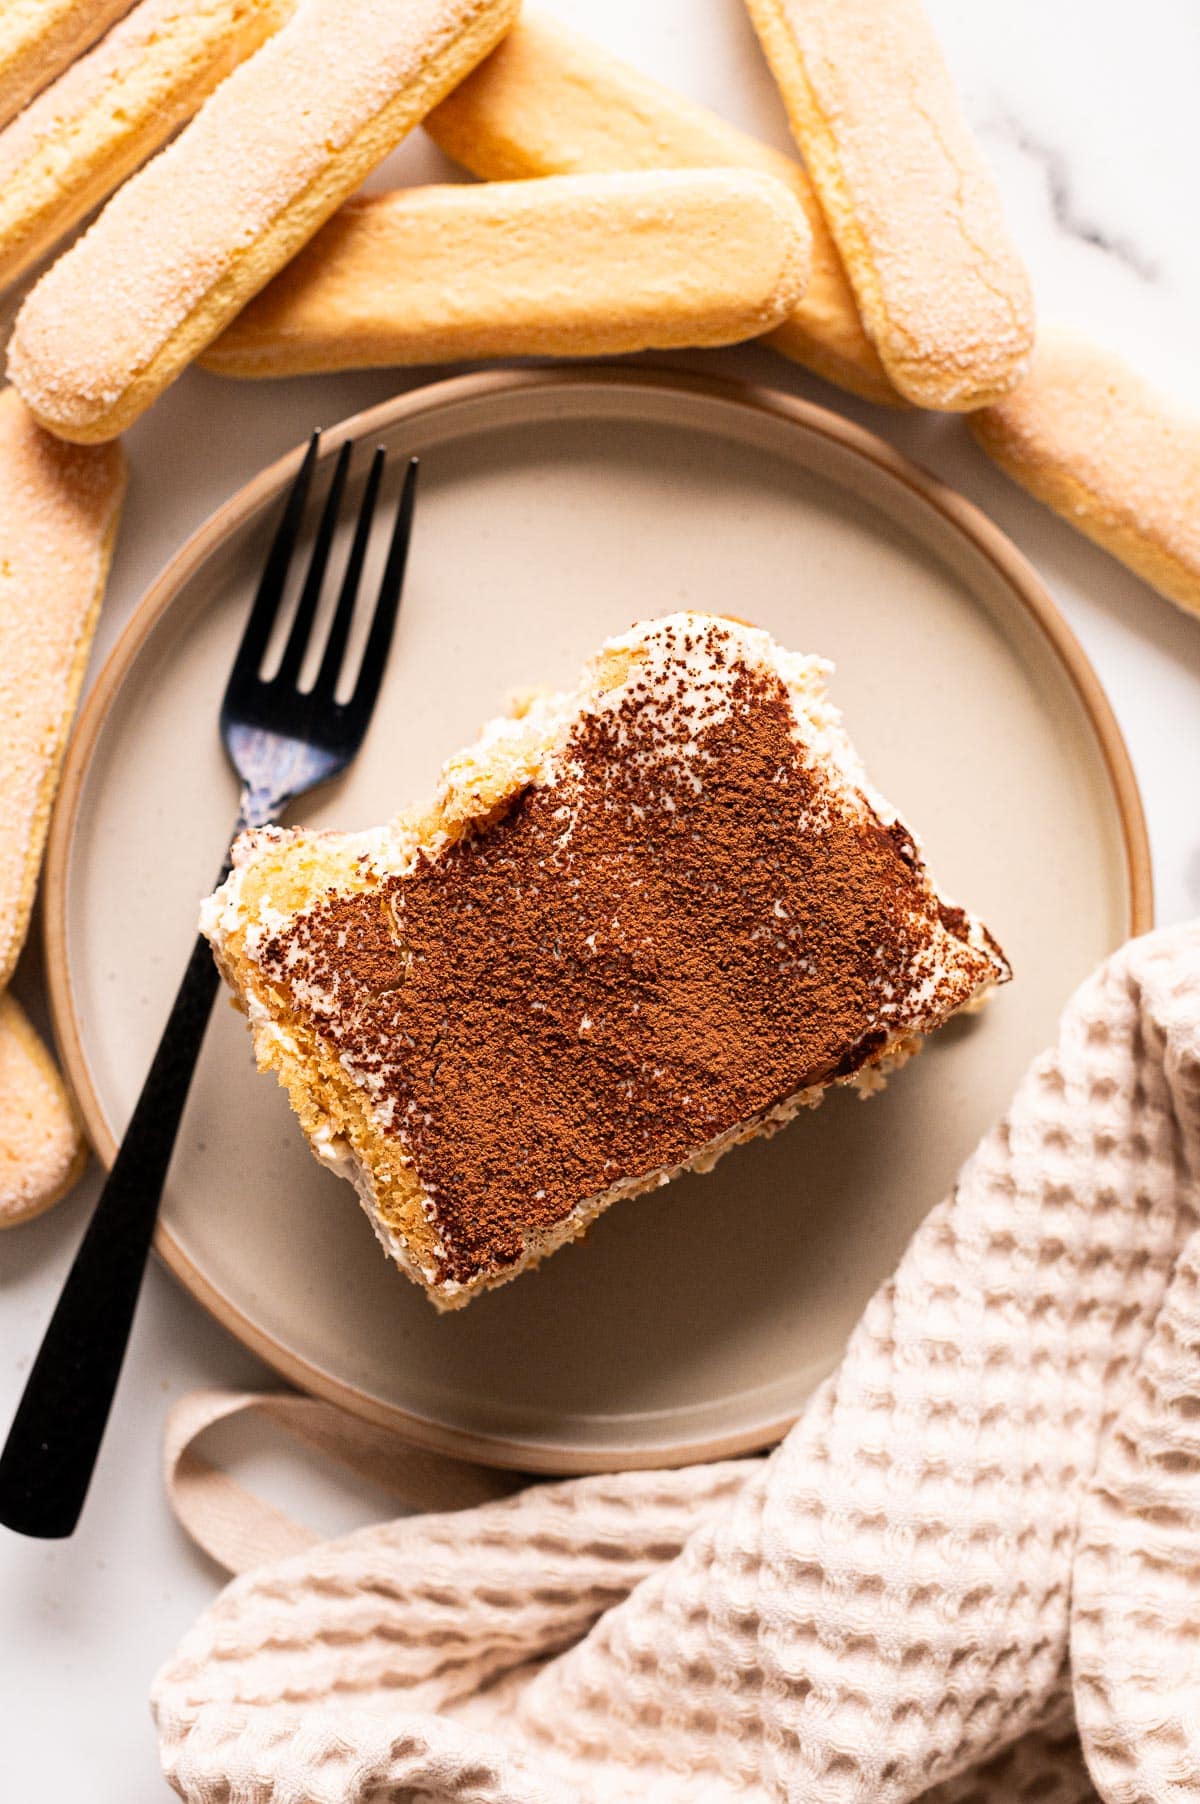 Cottage cheese tiramisu served on a plate with a fork.